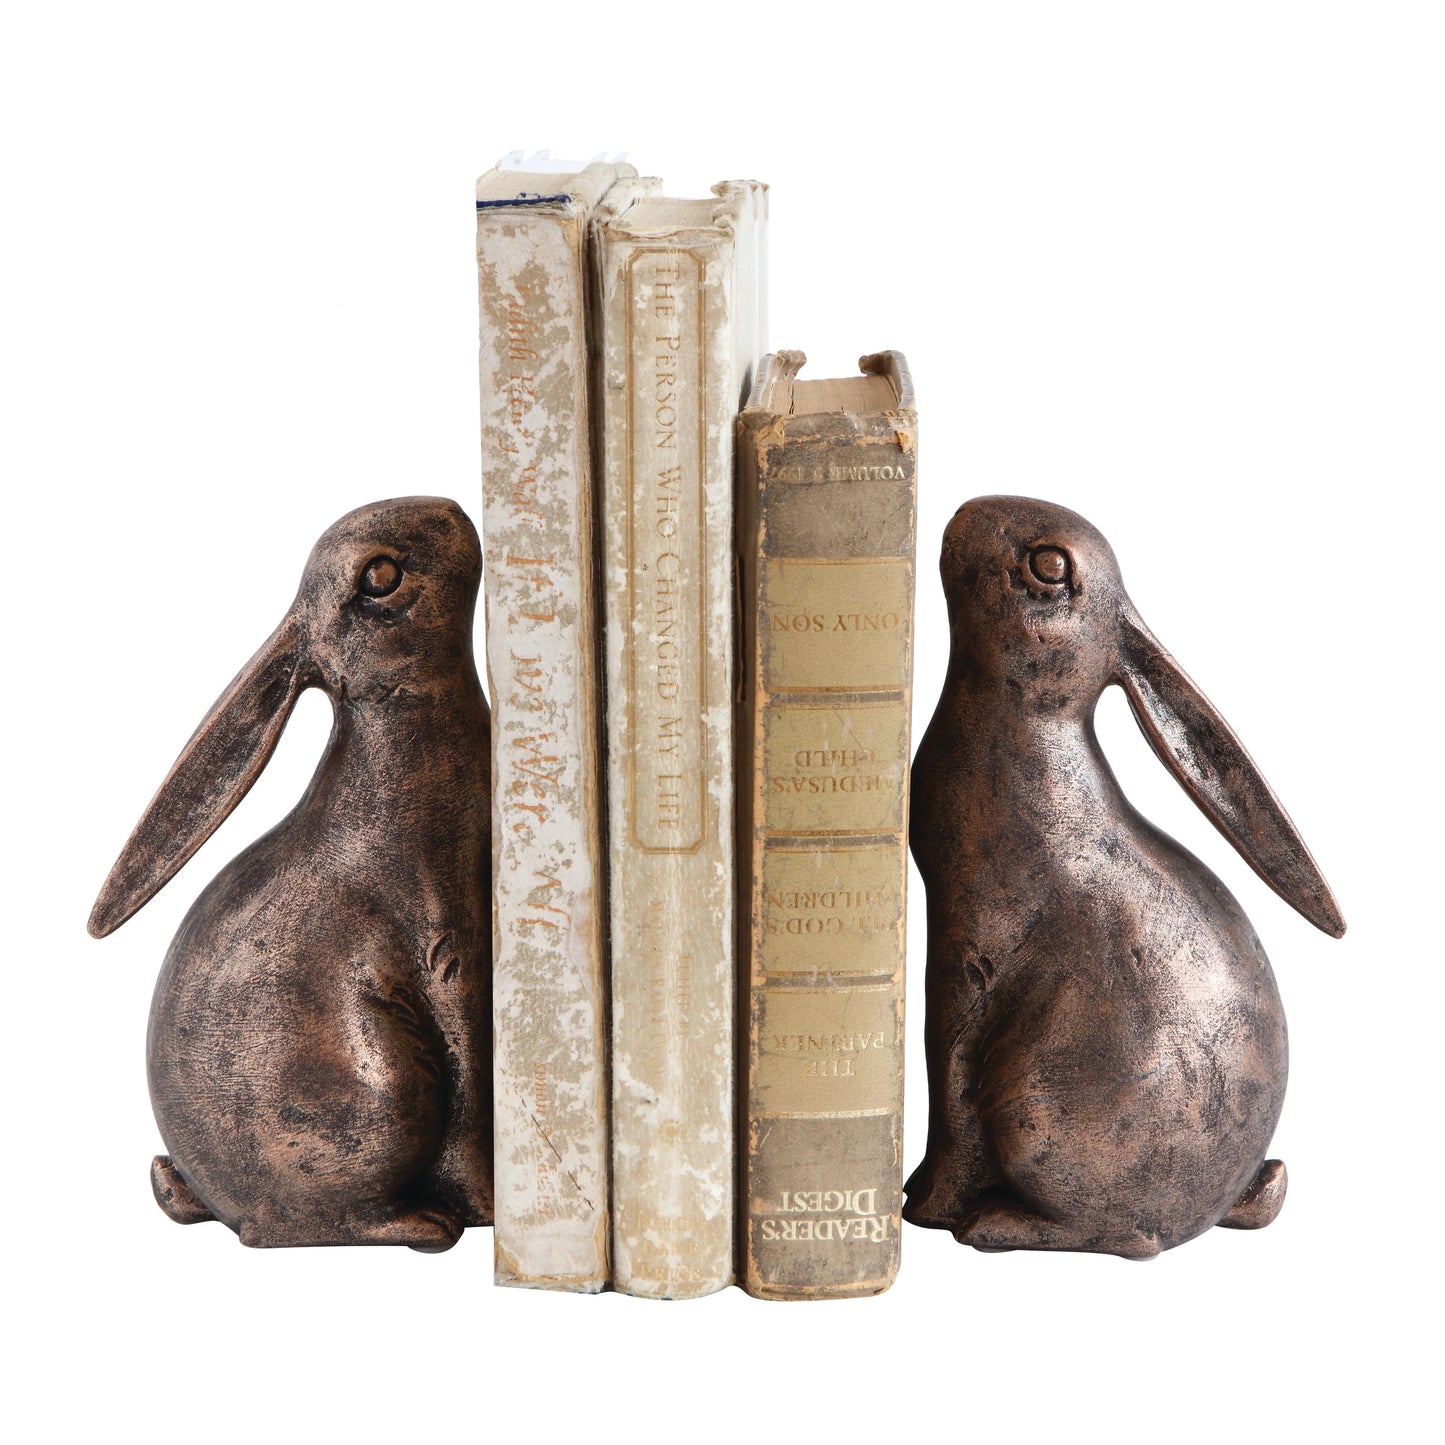 Bunny Bookends | Set of 2